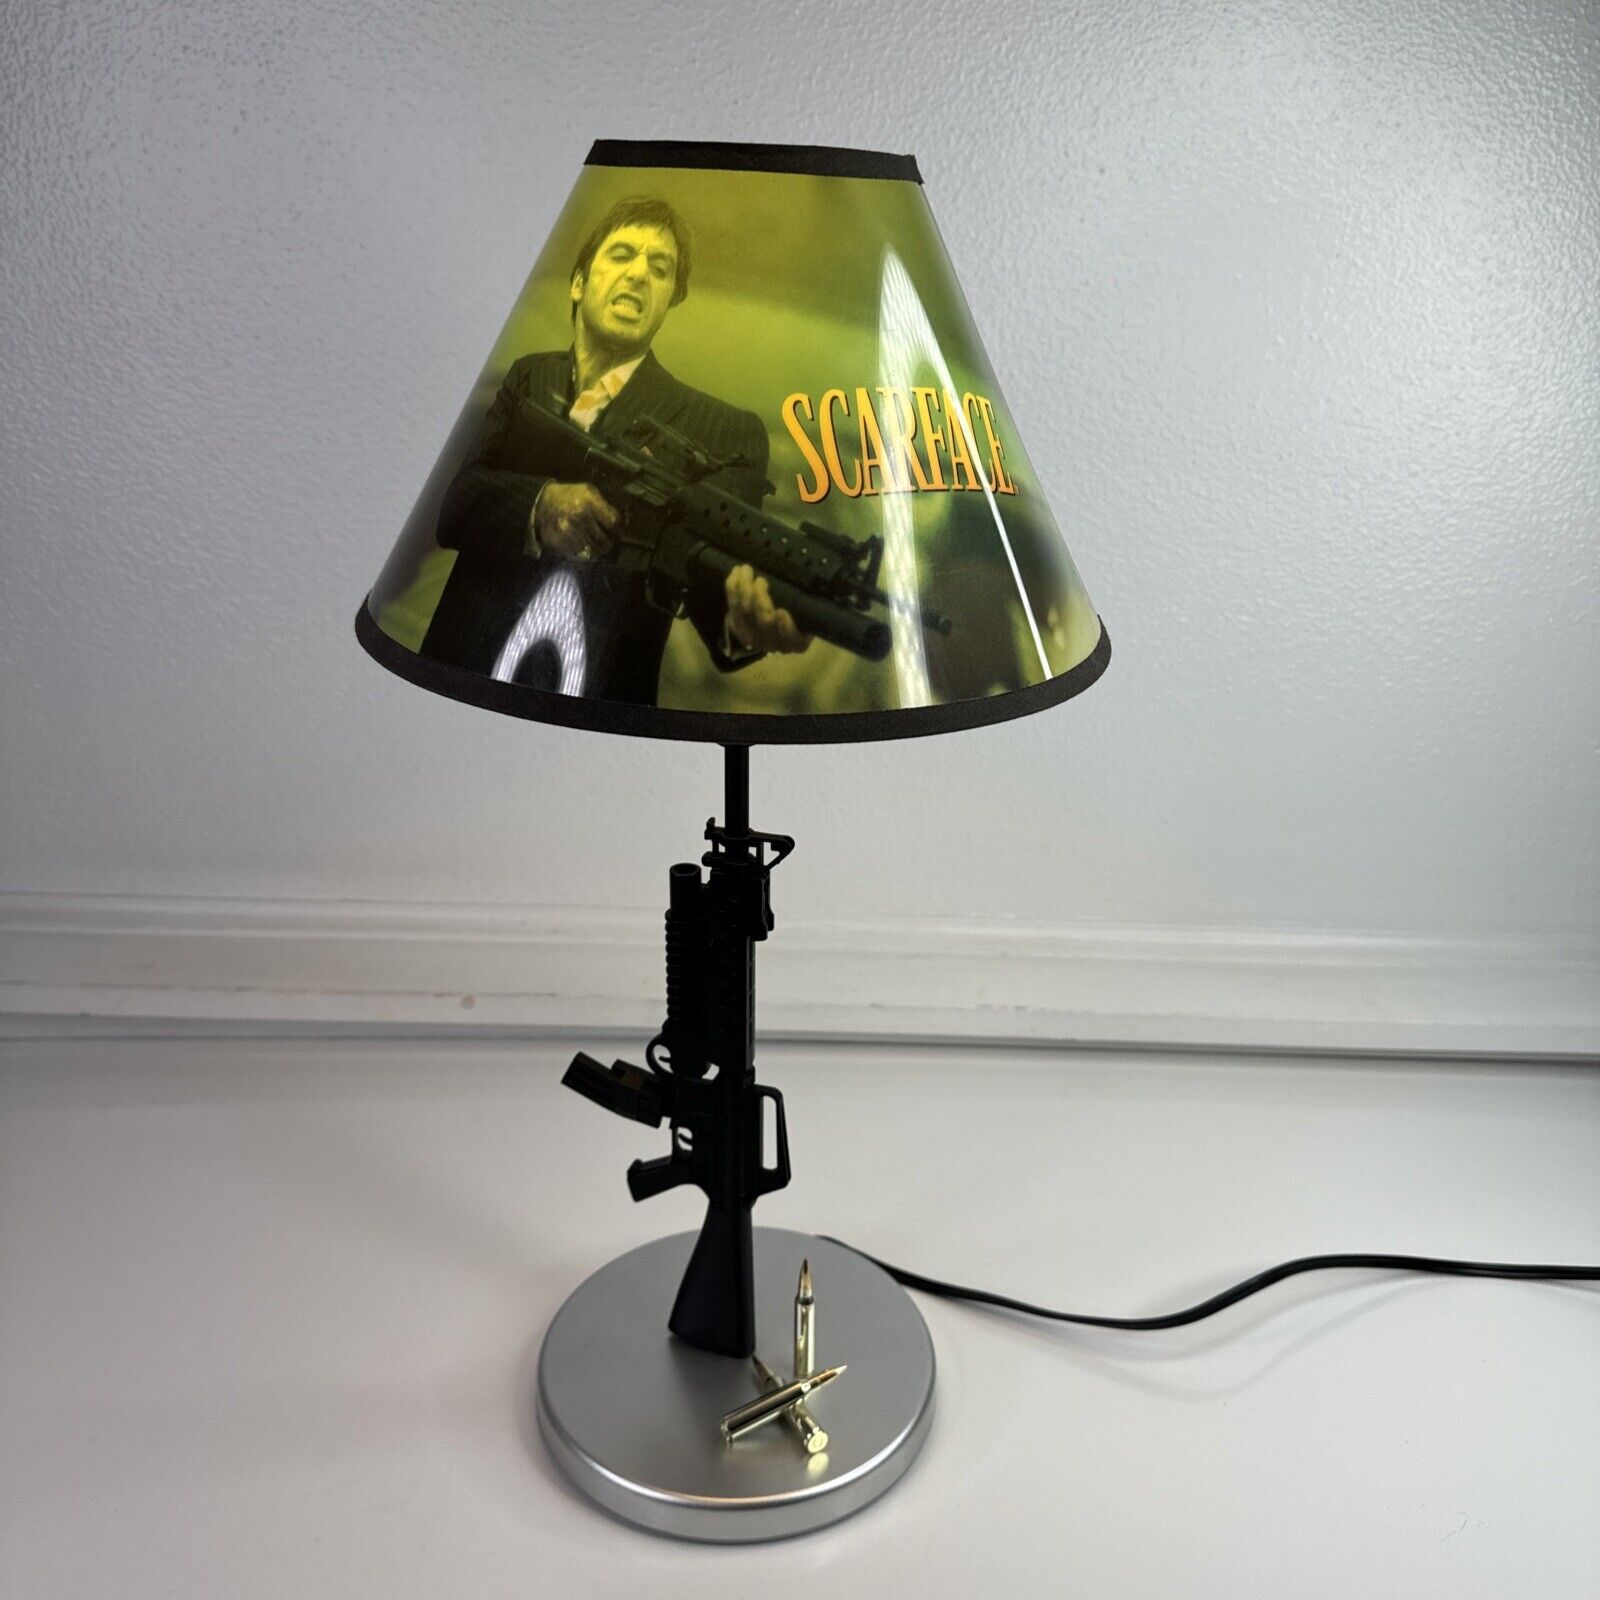 Scarface Table Lamp With Machine Gun Stem Bullets On Base SAY HELLO TO MY LITTLE